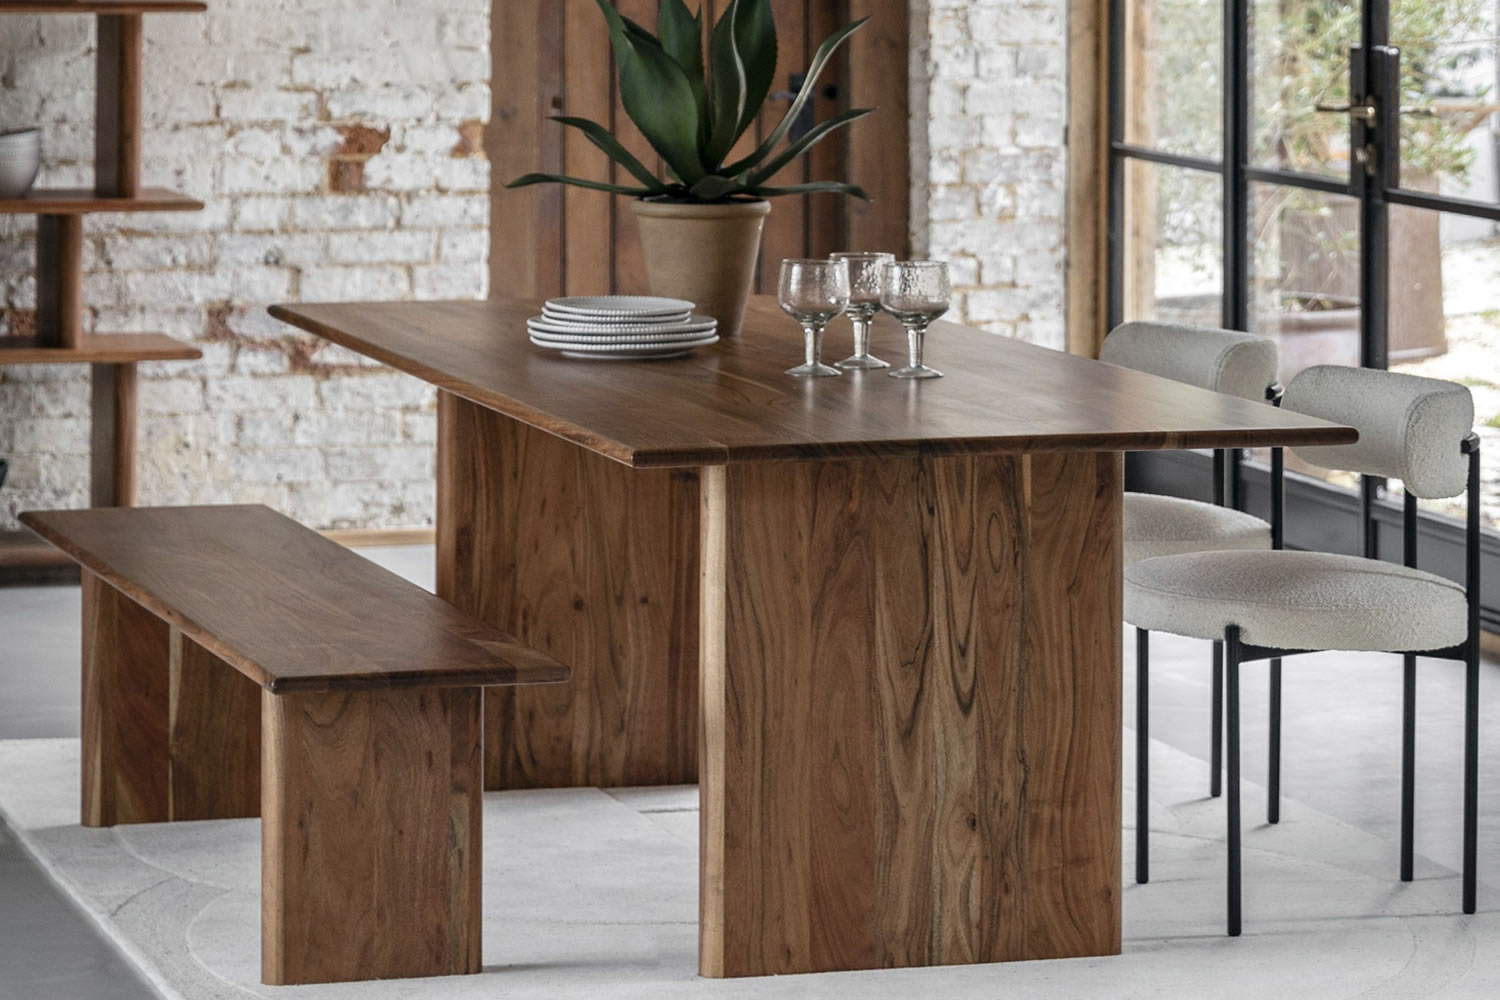 View Large Borden Kitchen or Dining Room Wooden Table Crafted From Solid Acacia Wood Rich Grain Finish Robust Solid Legs Seats Up To 10 People information